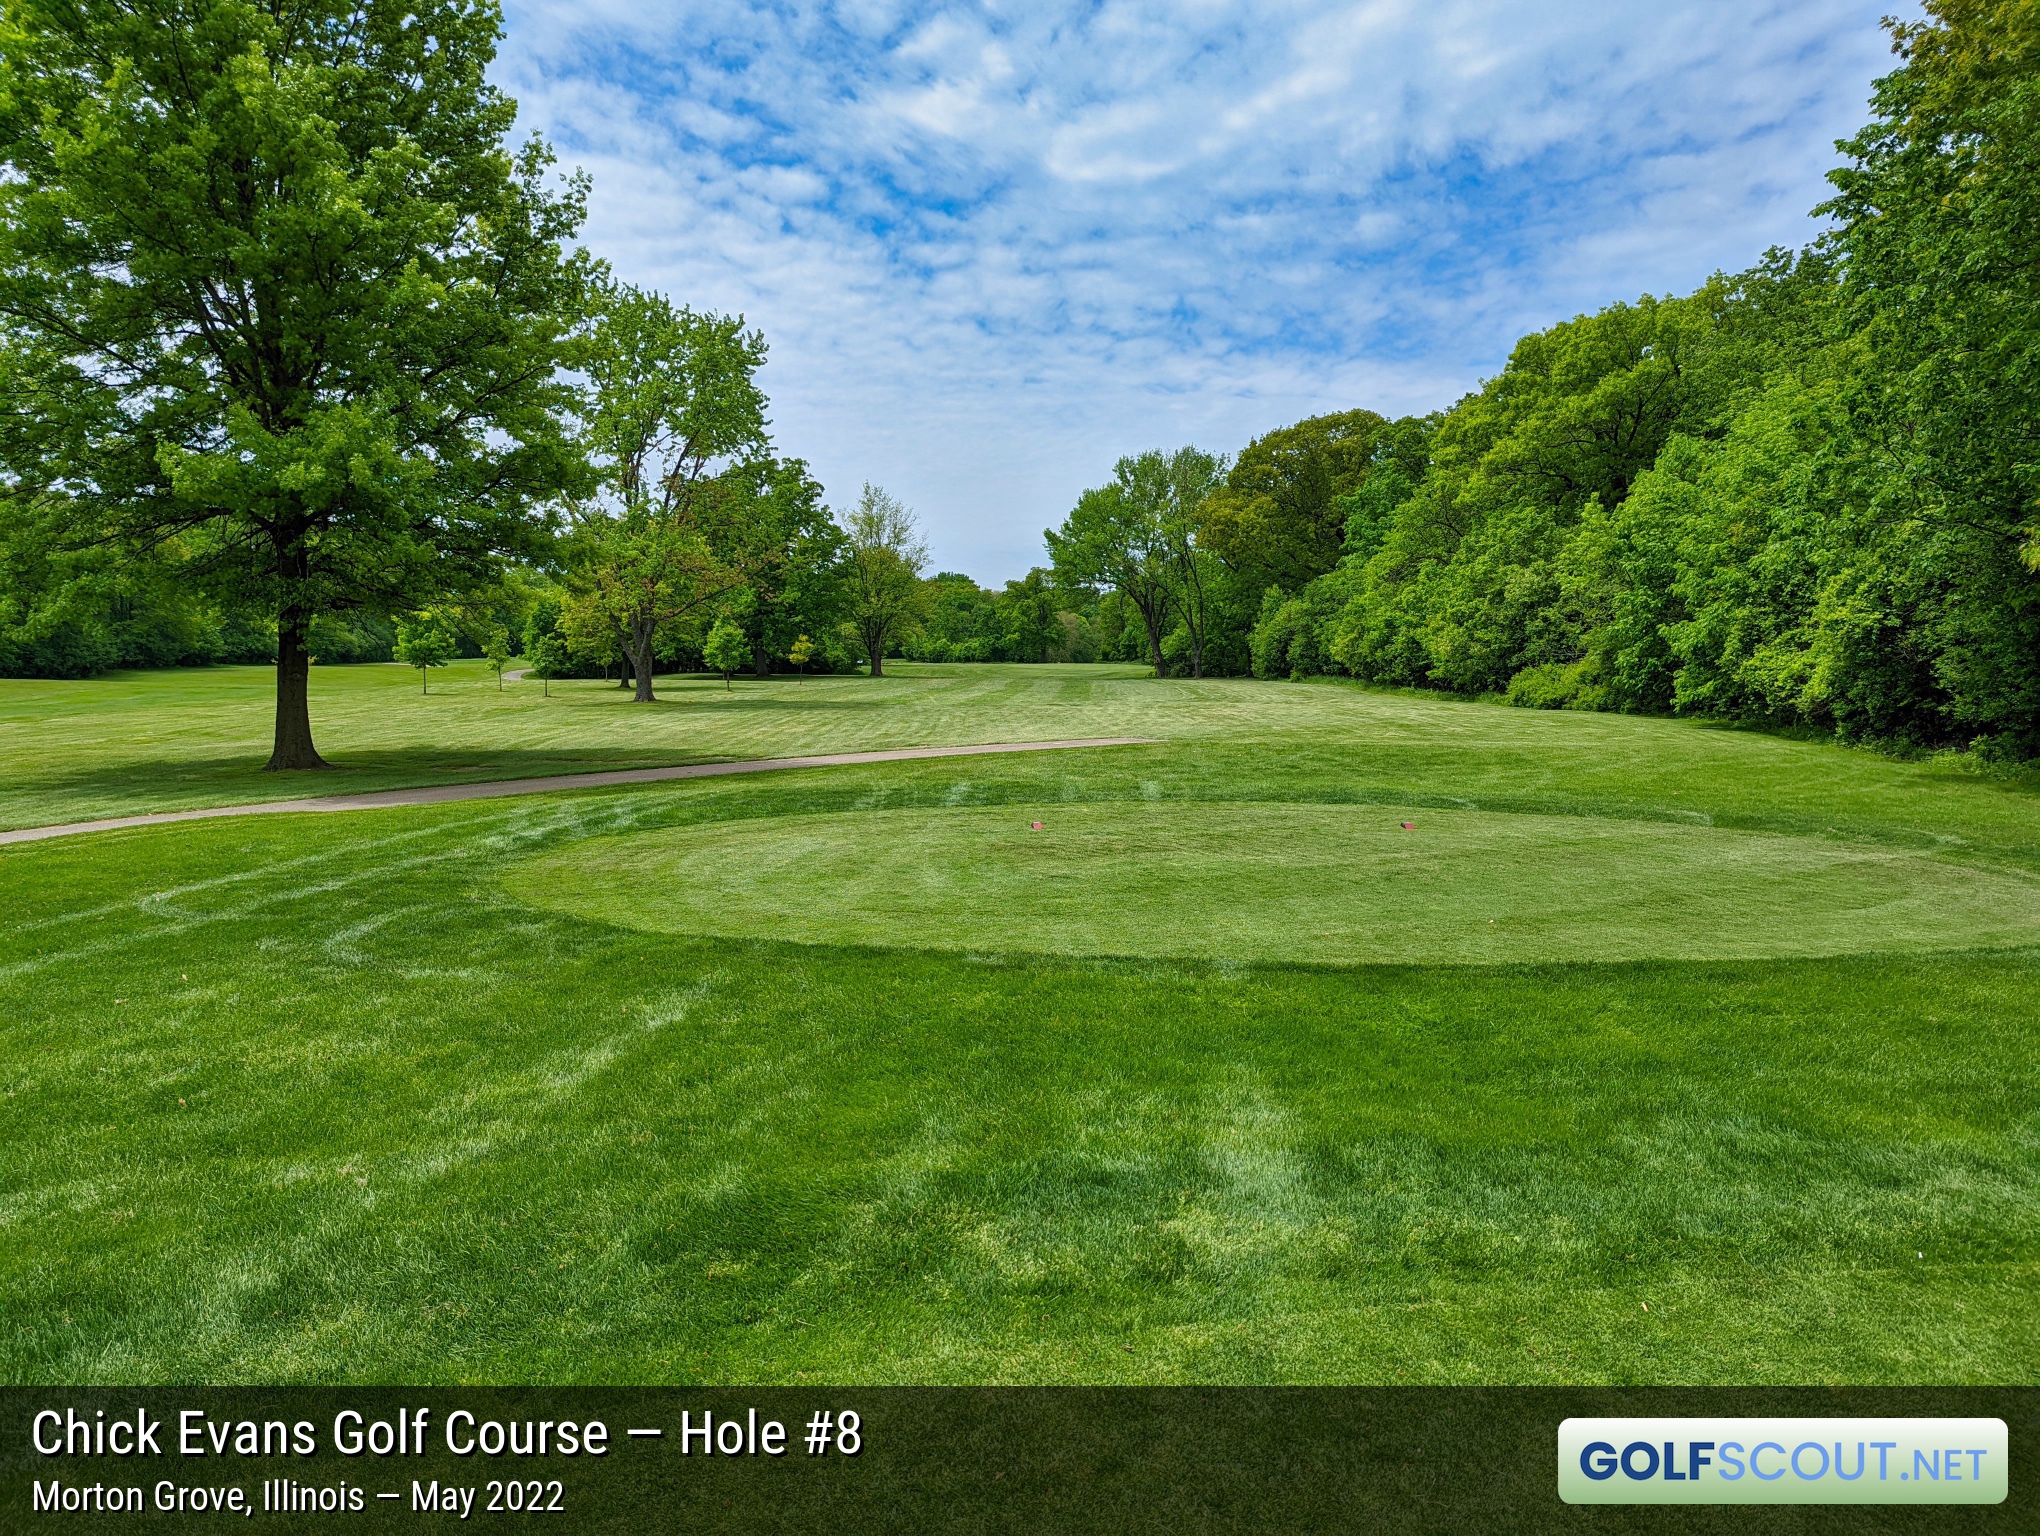 Photo of hole #8 at Chick Evans Golf Course in Morton Grove, Illinois. 